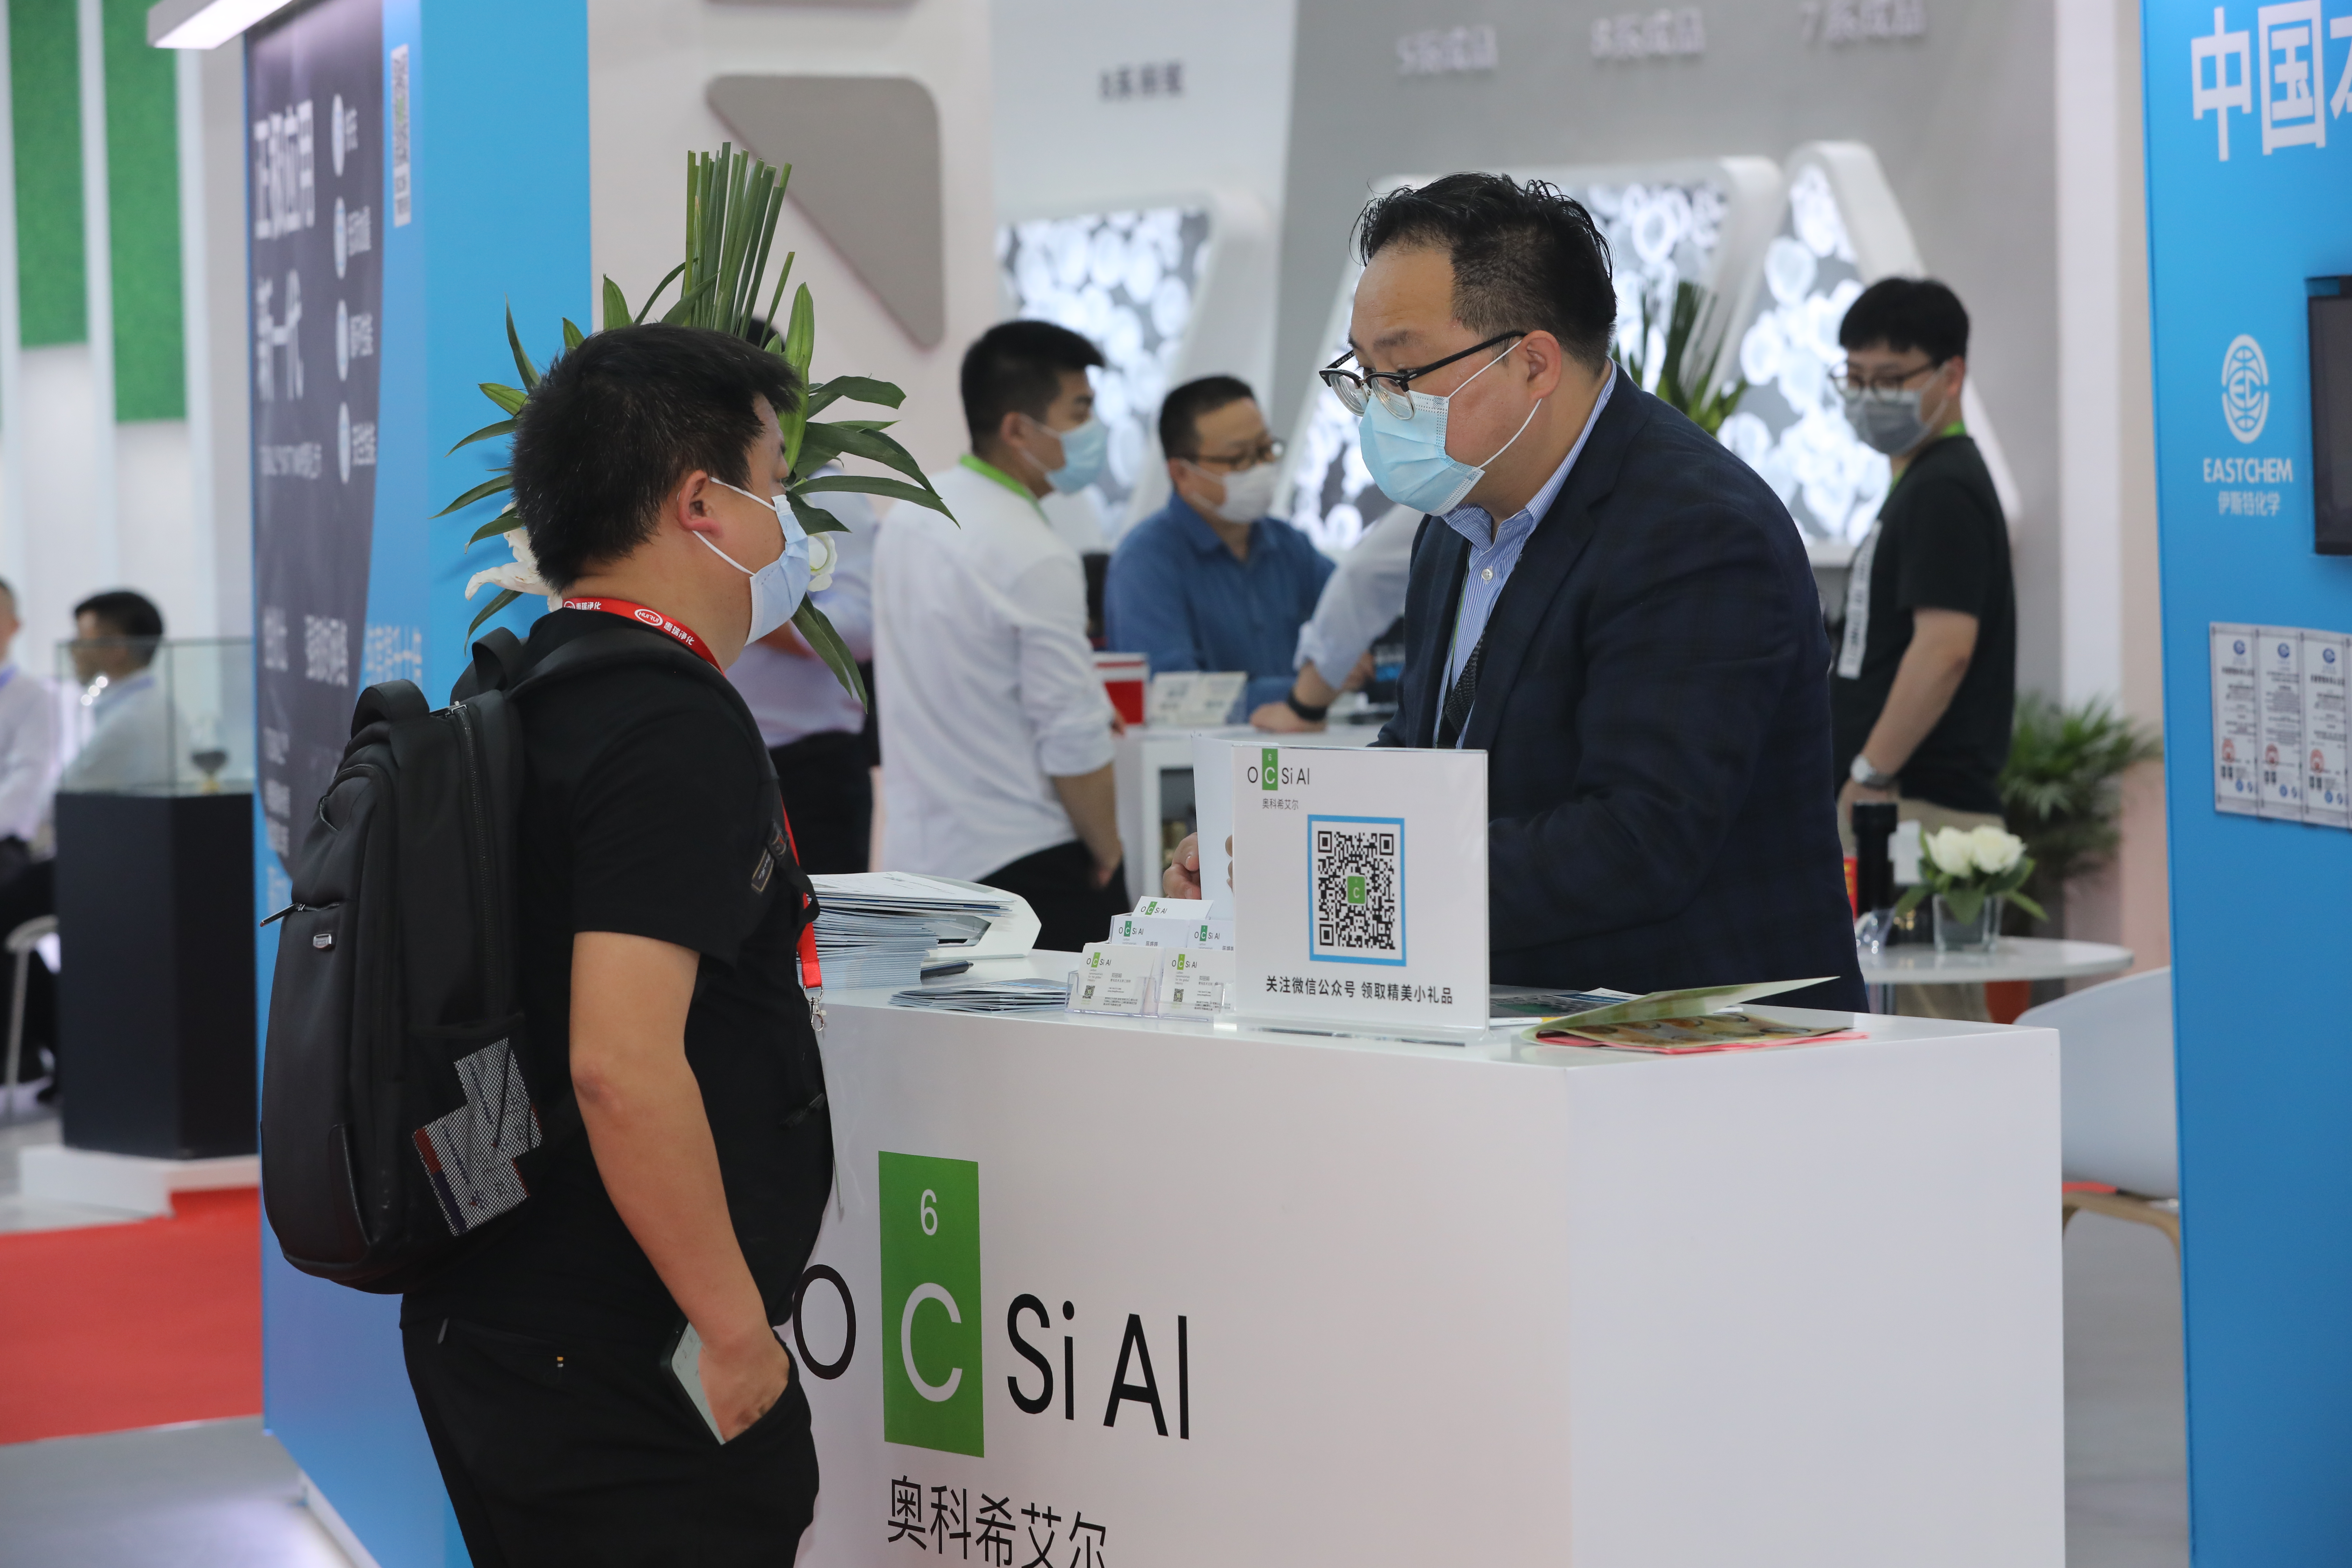 OCSiAl at 21st International Exhibition on Rubber Technology